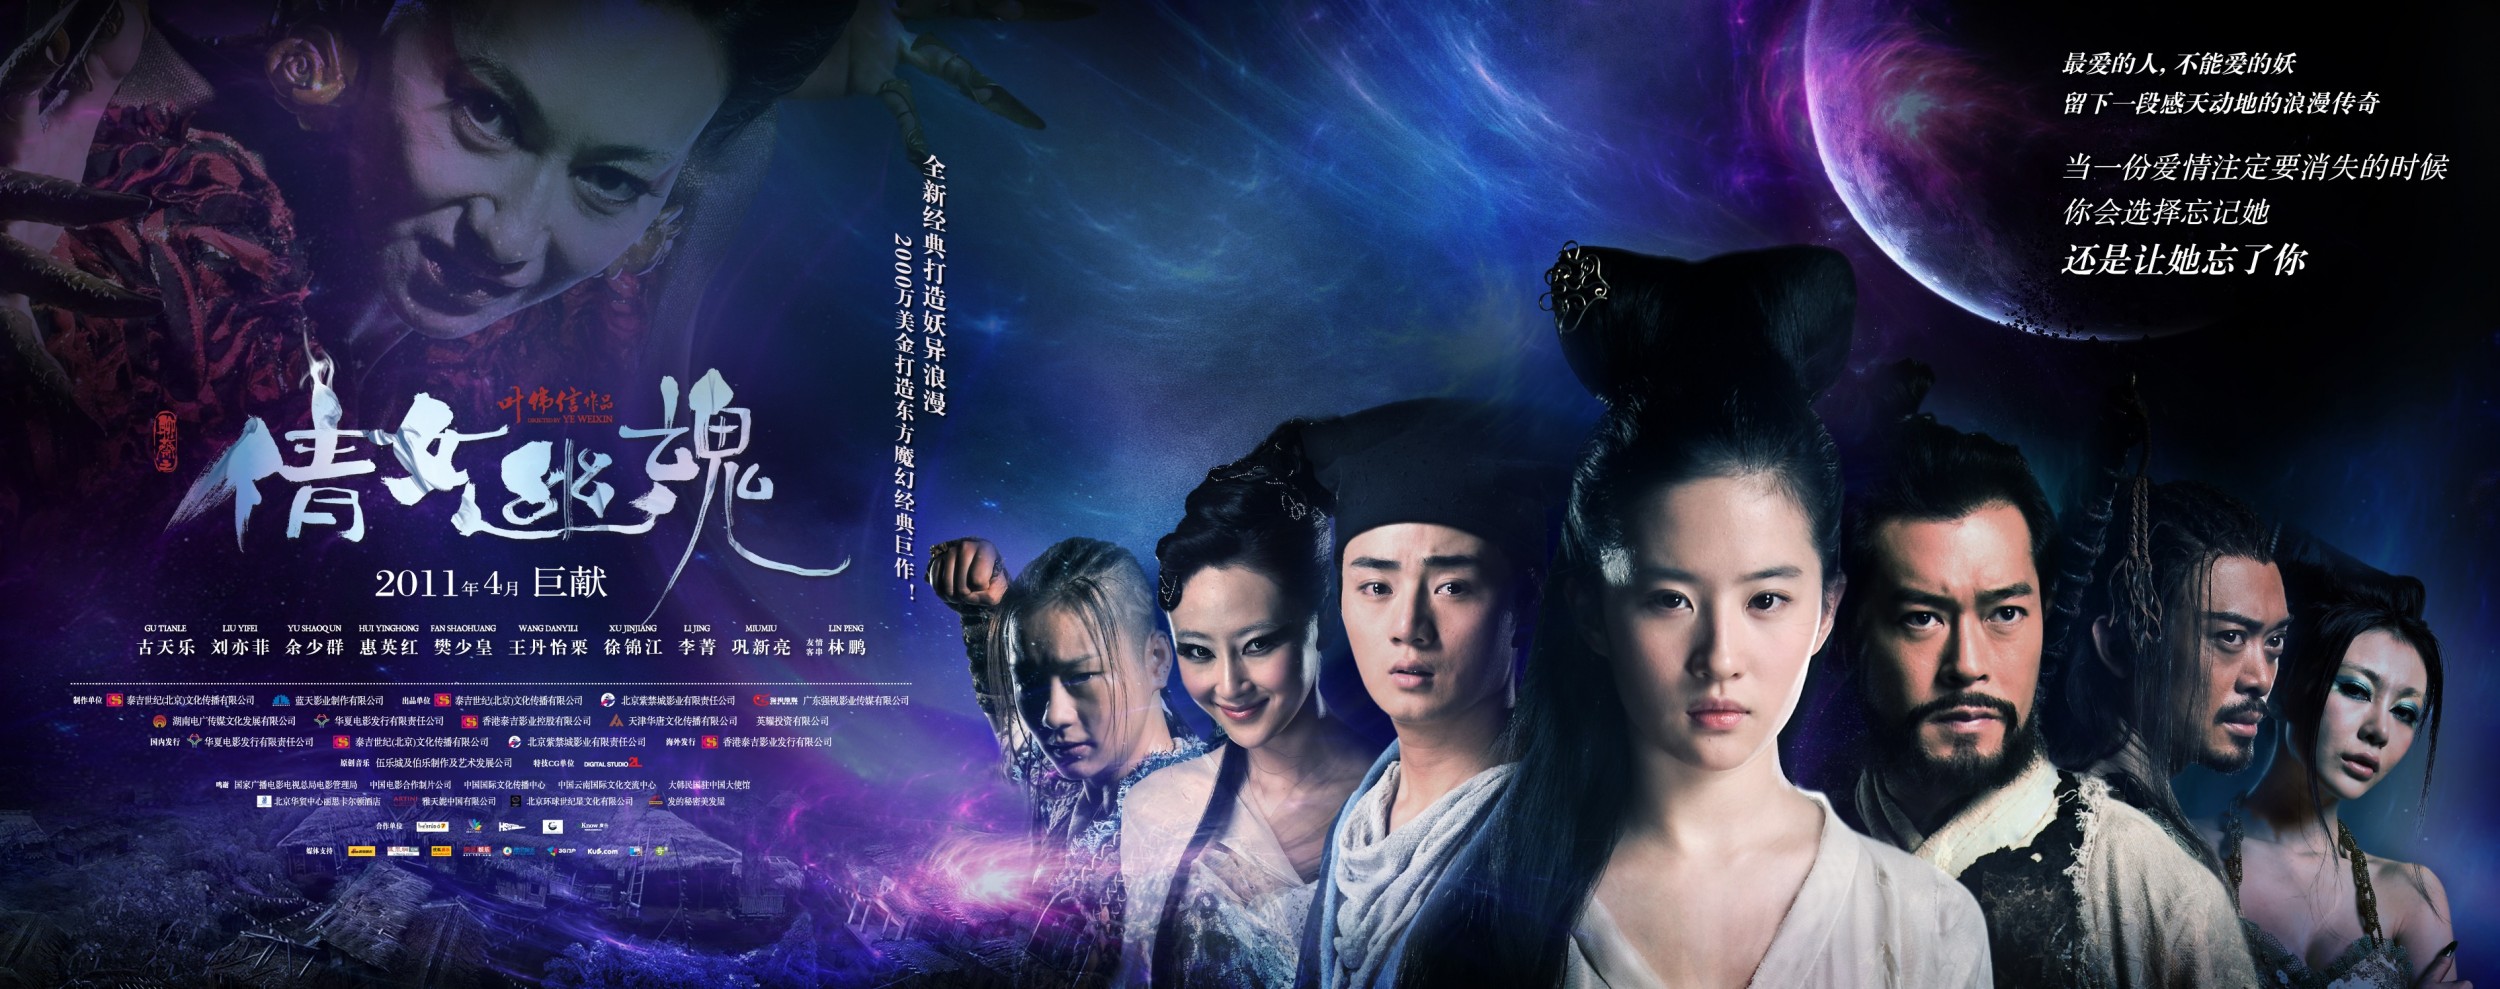 Mega Sized Movie Poster Image for Sien nui yau wan (#1 of 2)